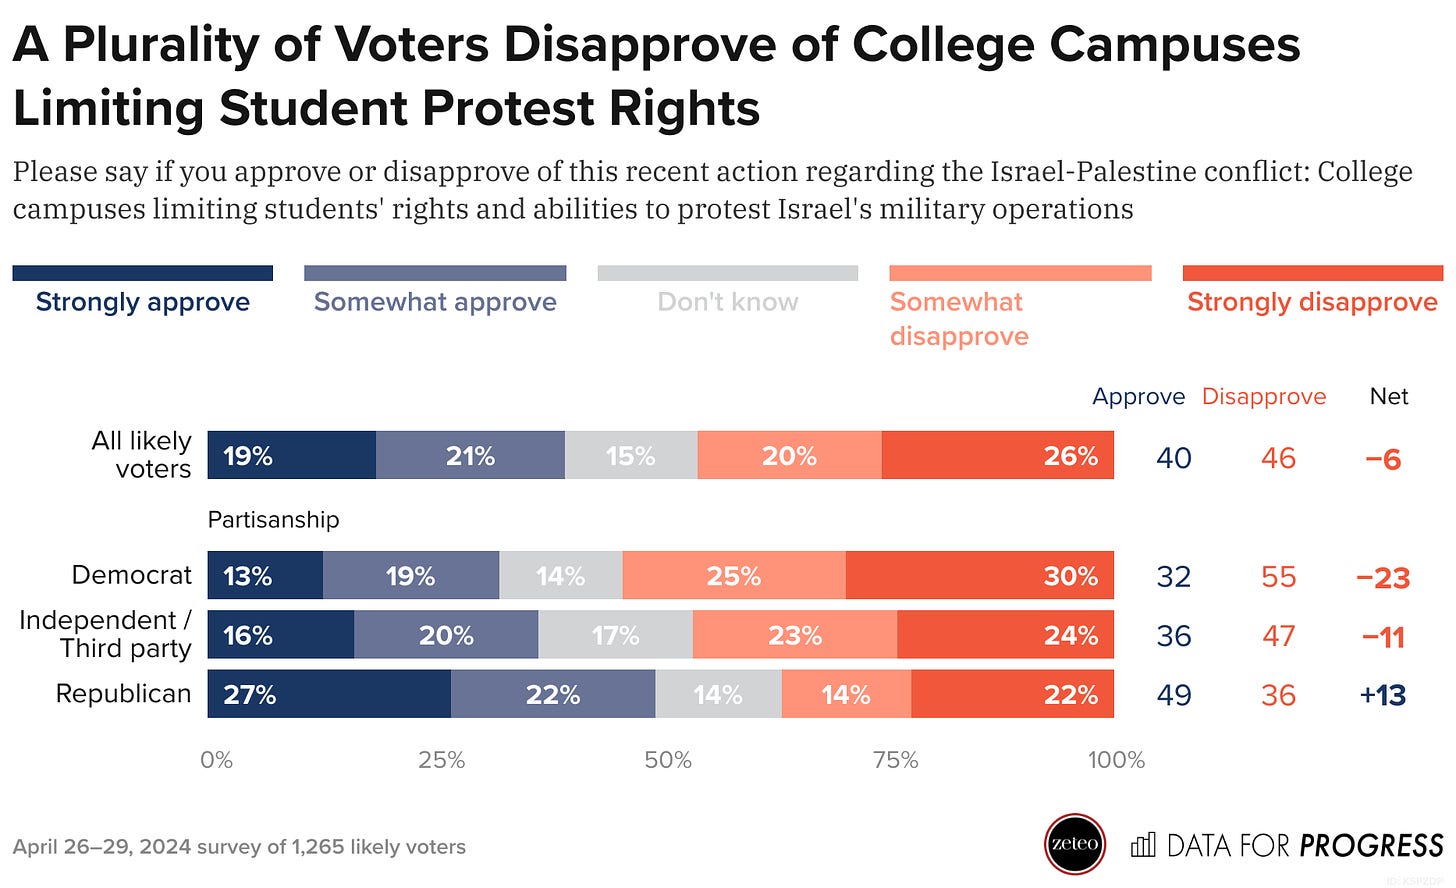 A plurality of voters disapprove of college campuses limiting student protest rights.